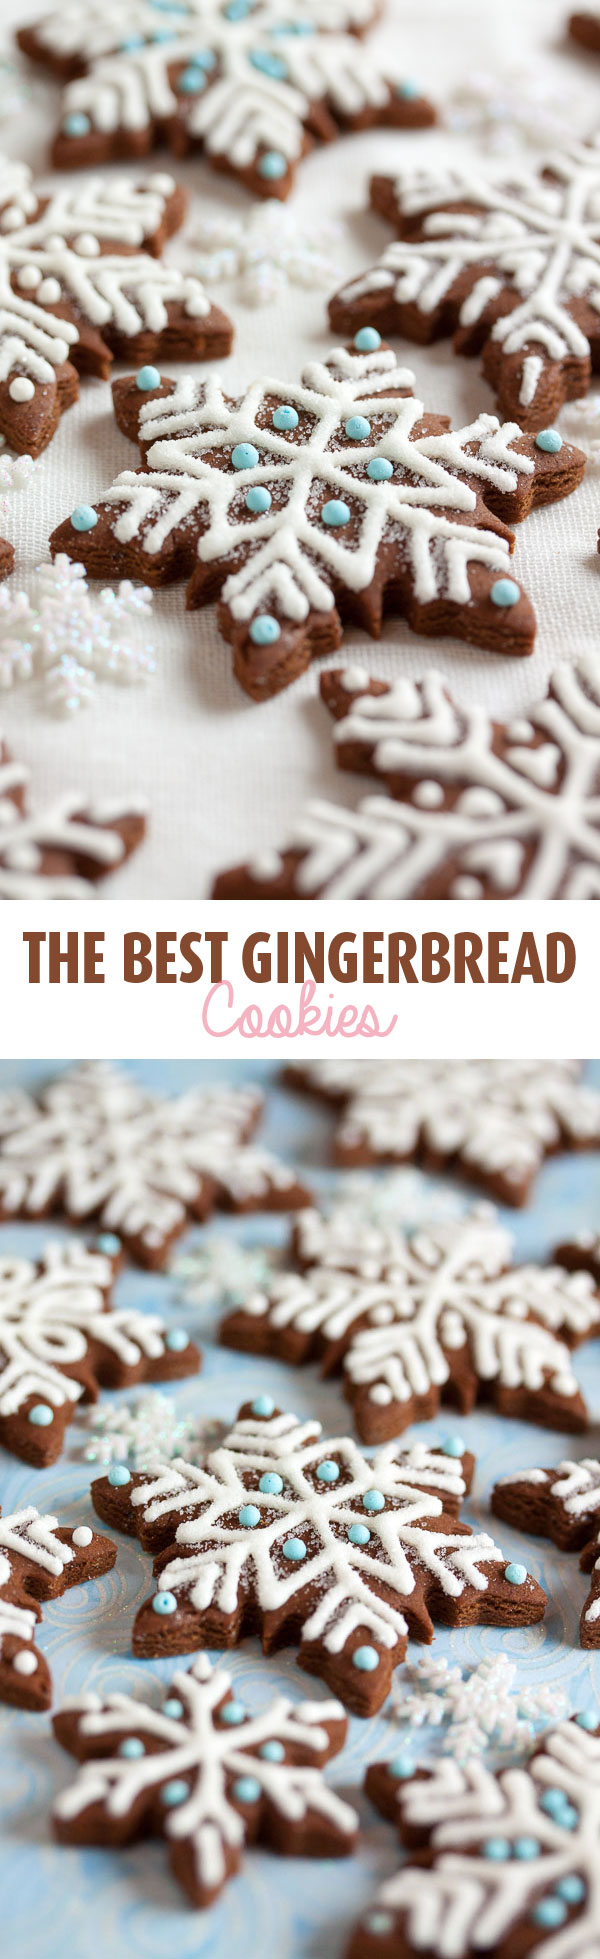 This is my absolute favourite gingerbread. It's more than just a pretty cookie – it's got a lovely soft texture, holds its shape well, and is loaded with flavour. Whether you're making gingerbread snowflakes or spooky halloween cookies, this is your recipe!